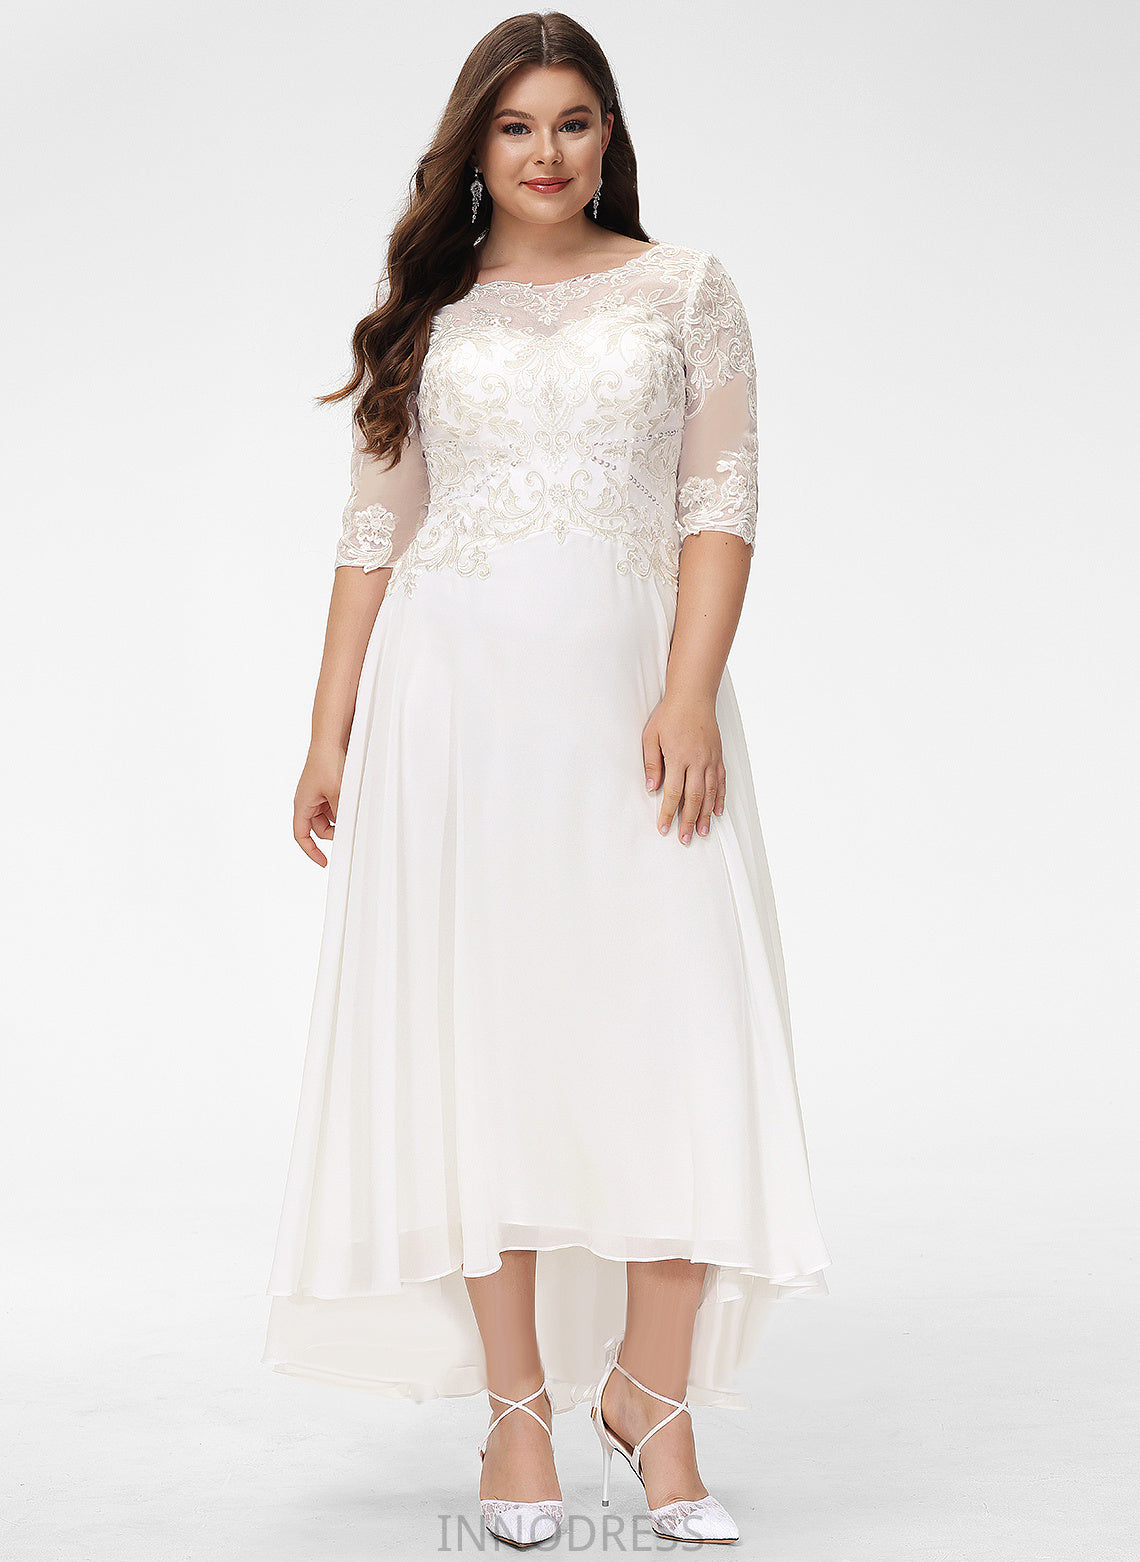 Lace With Sequins A-Line Asymmetrical Wedding Dresses Beading Wedding Dress Neck Scoop Chiffon Felicity